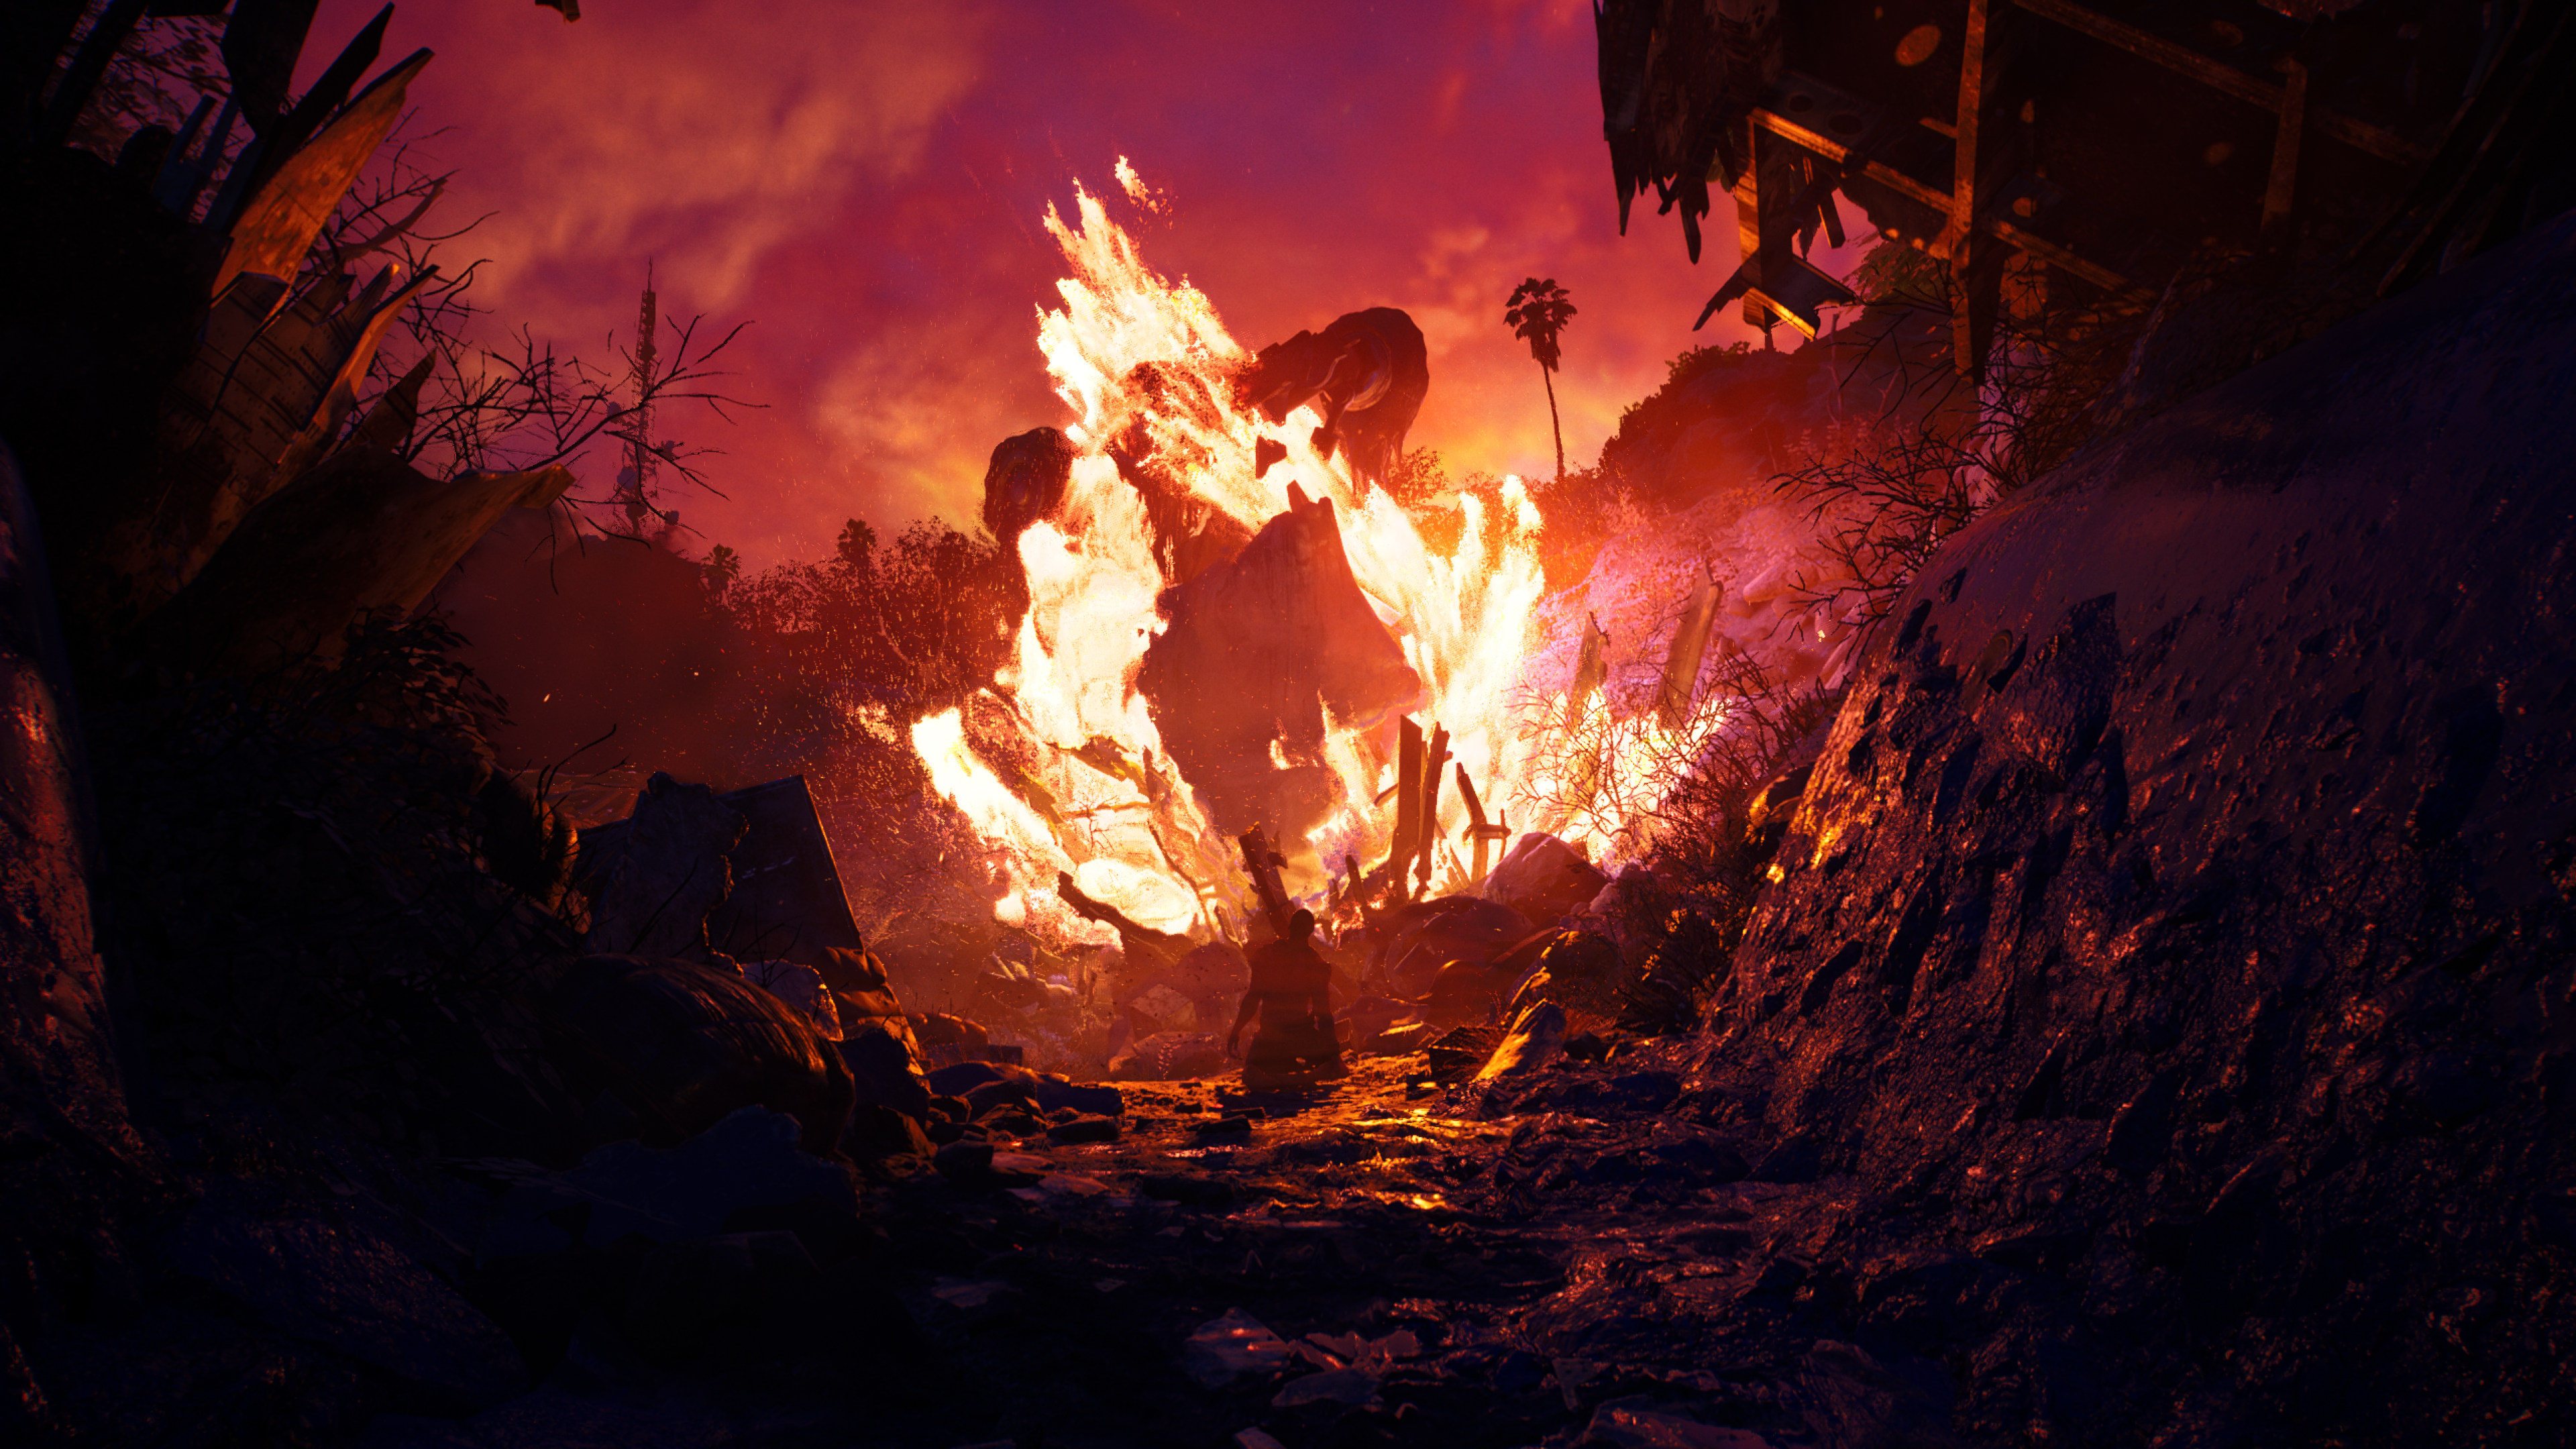 A huge chunk of flaming aeroplane wreckage in a crash site in Dead Island 2